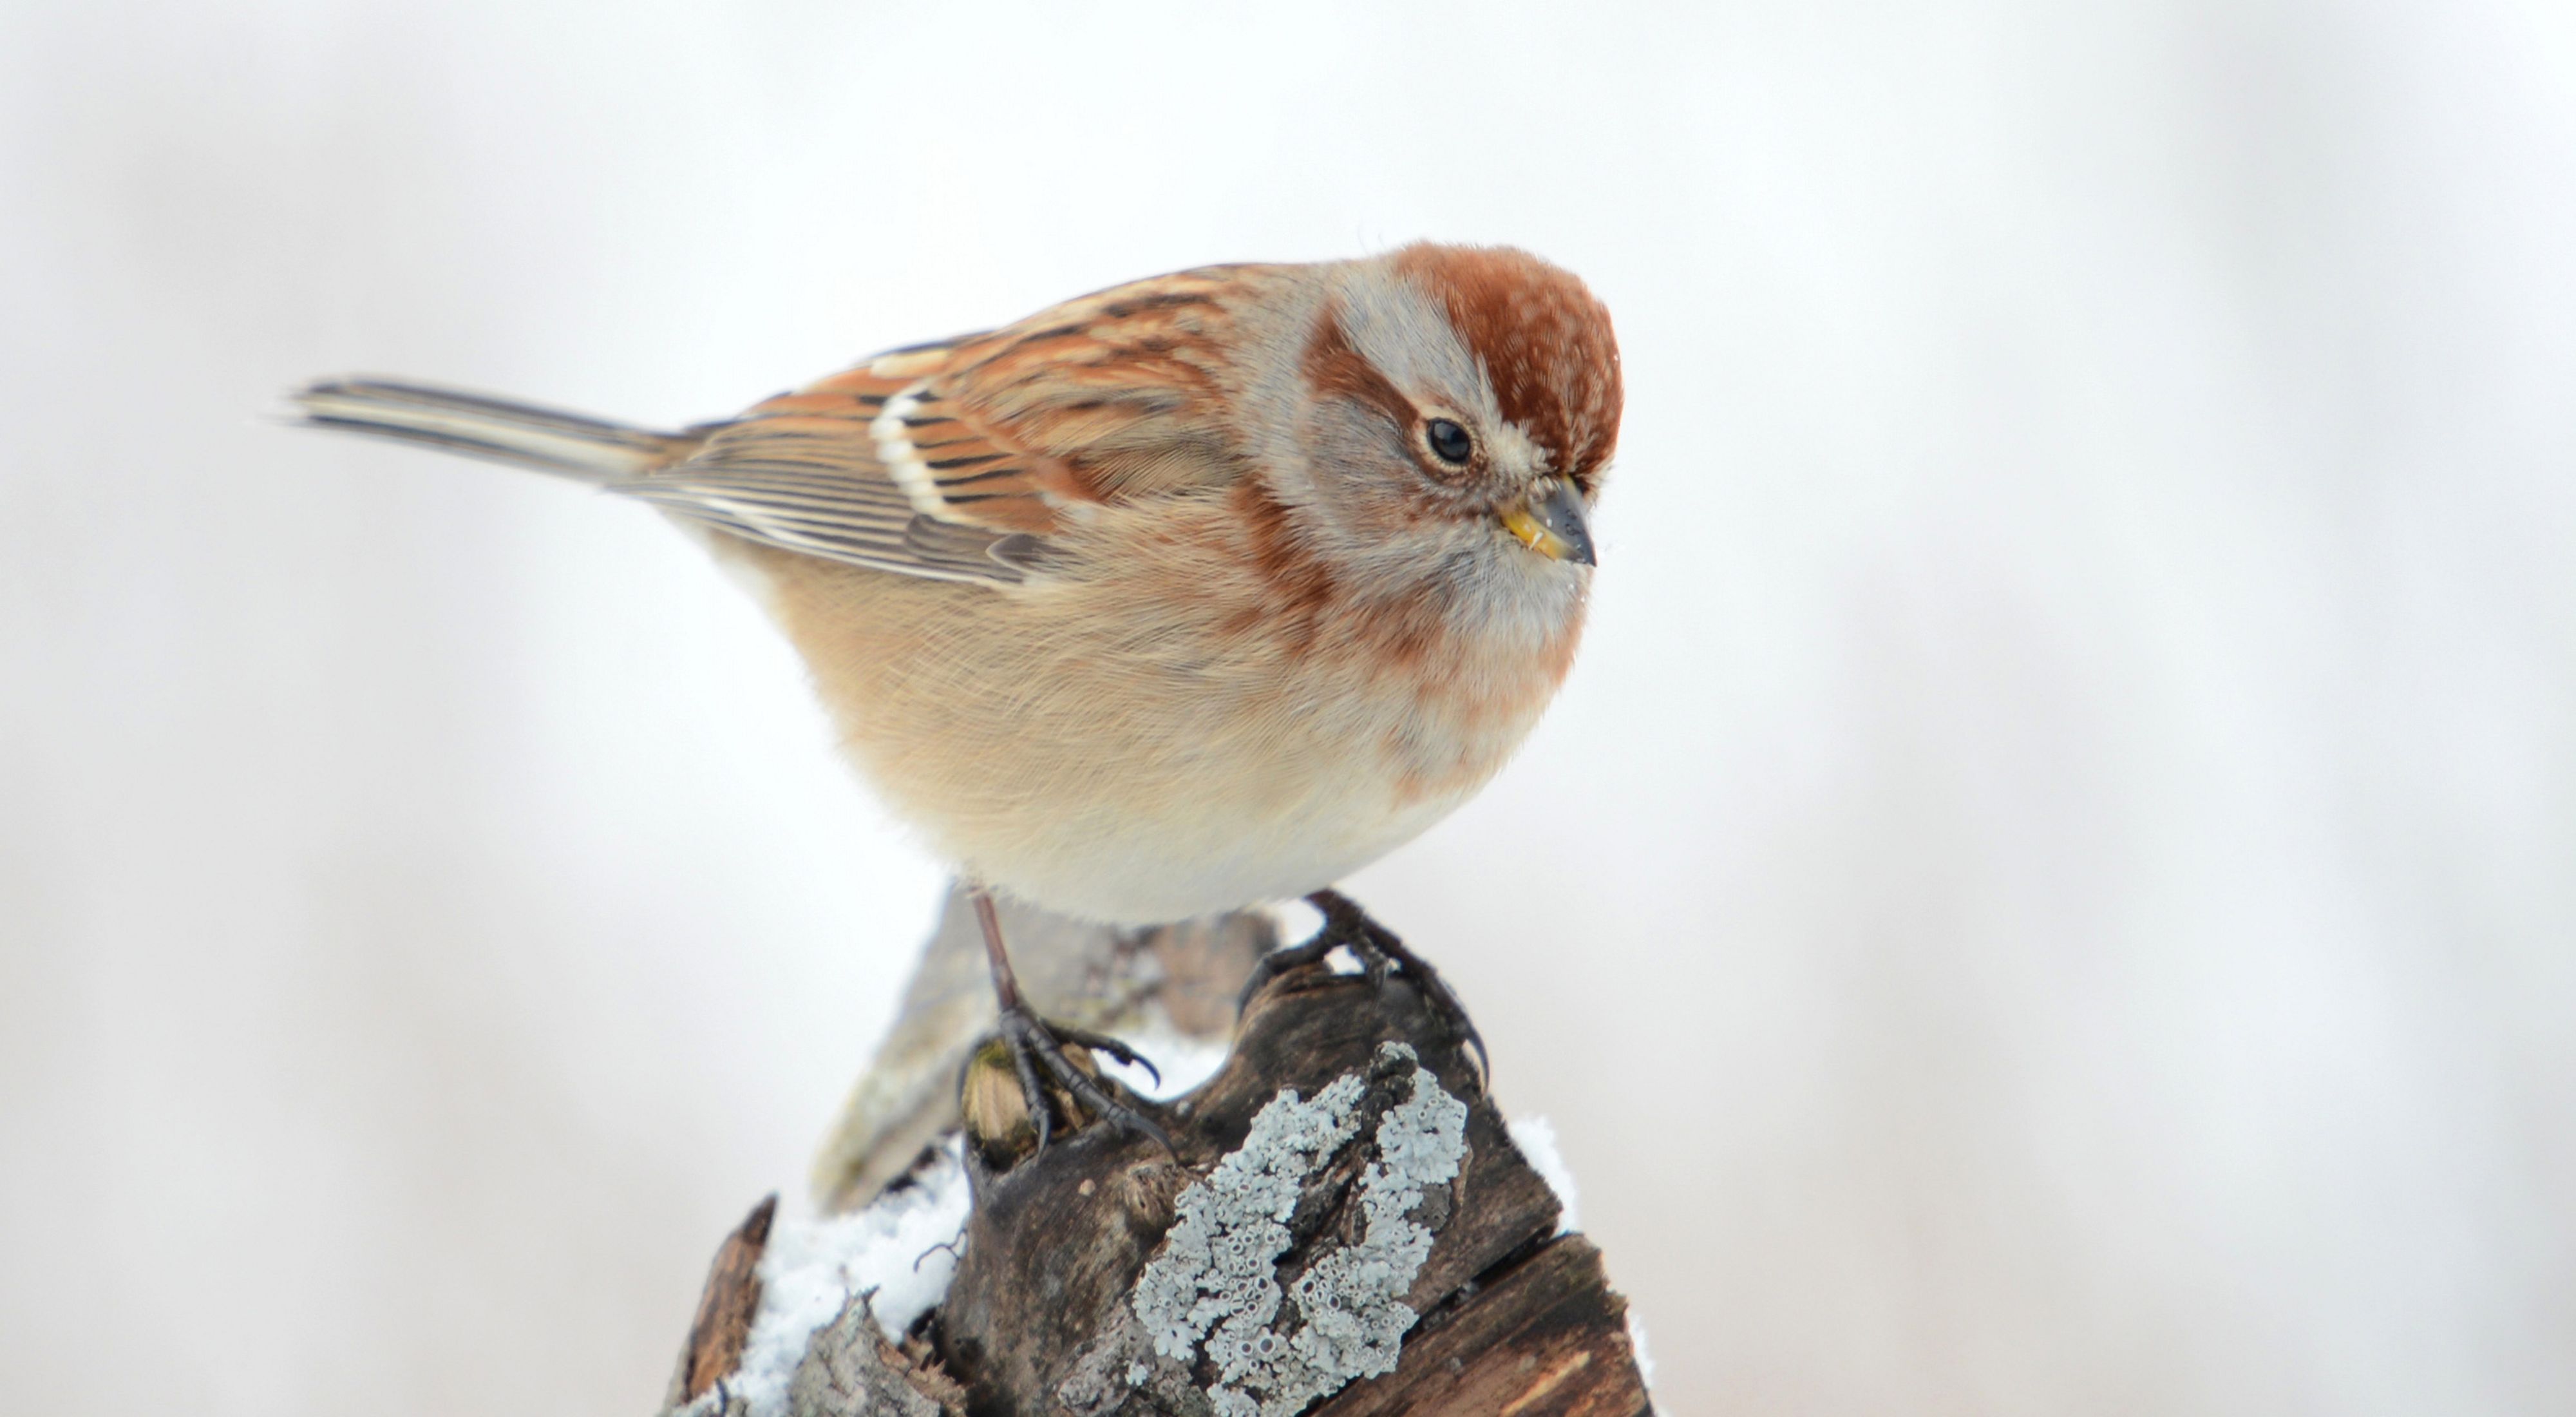 Small sparrow with brown markings perched on a stump.